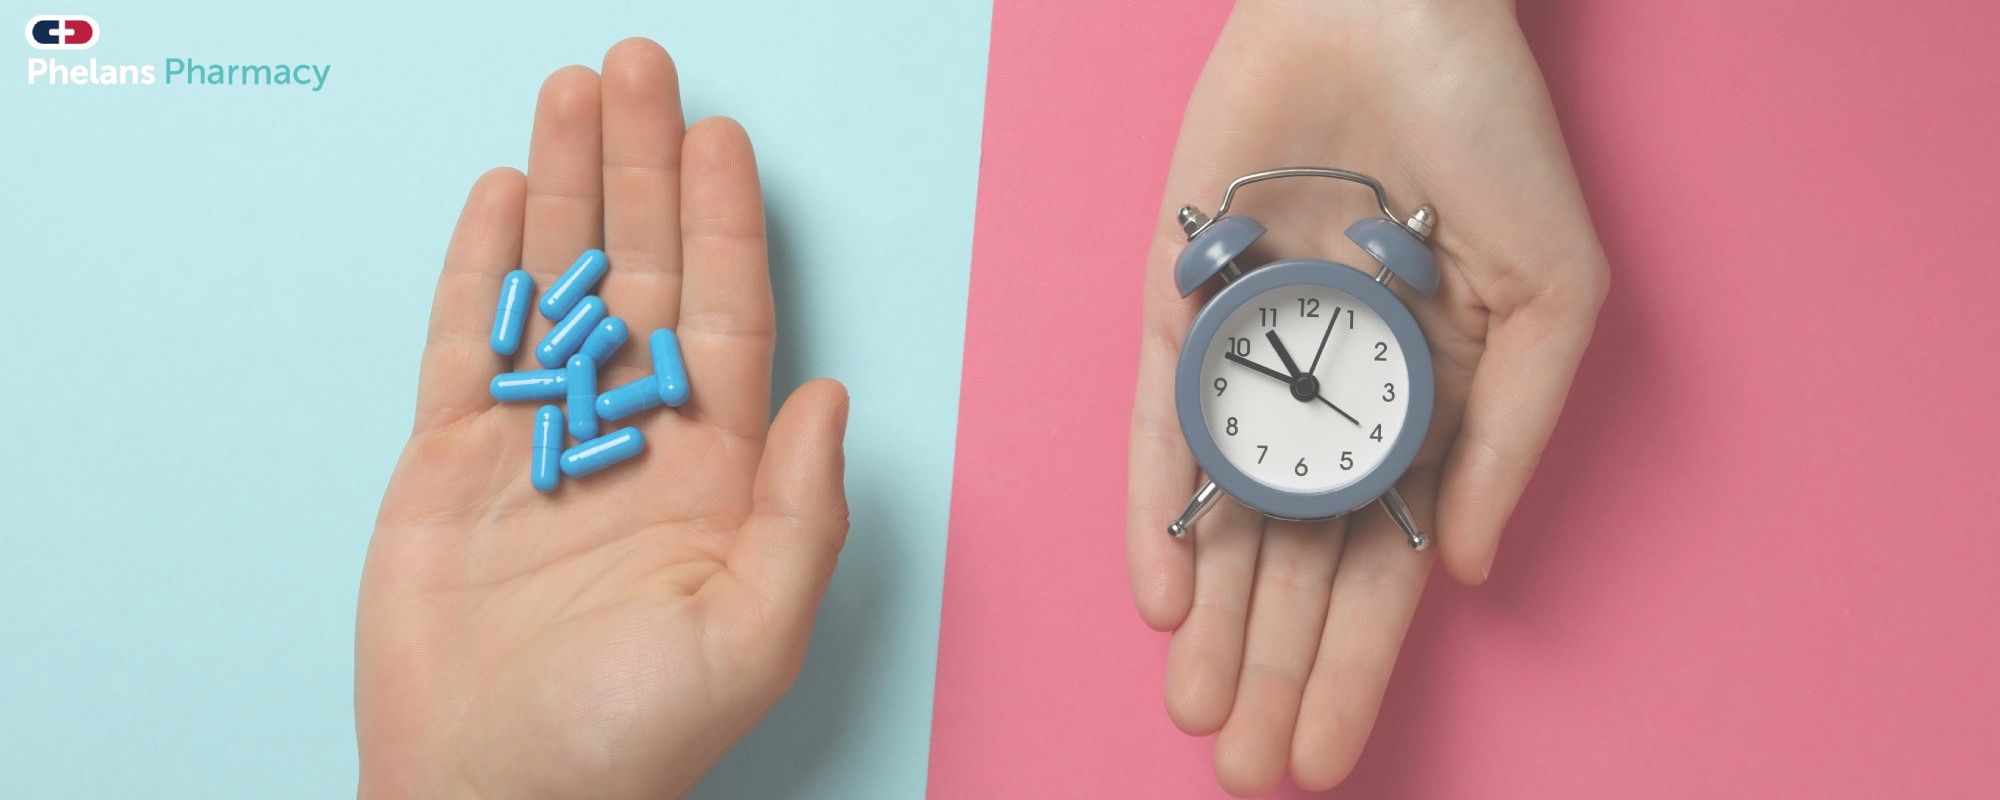 Timing is Key: When to Take Viagra for Optimal Performance